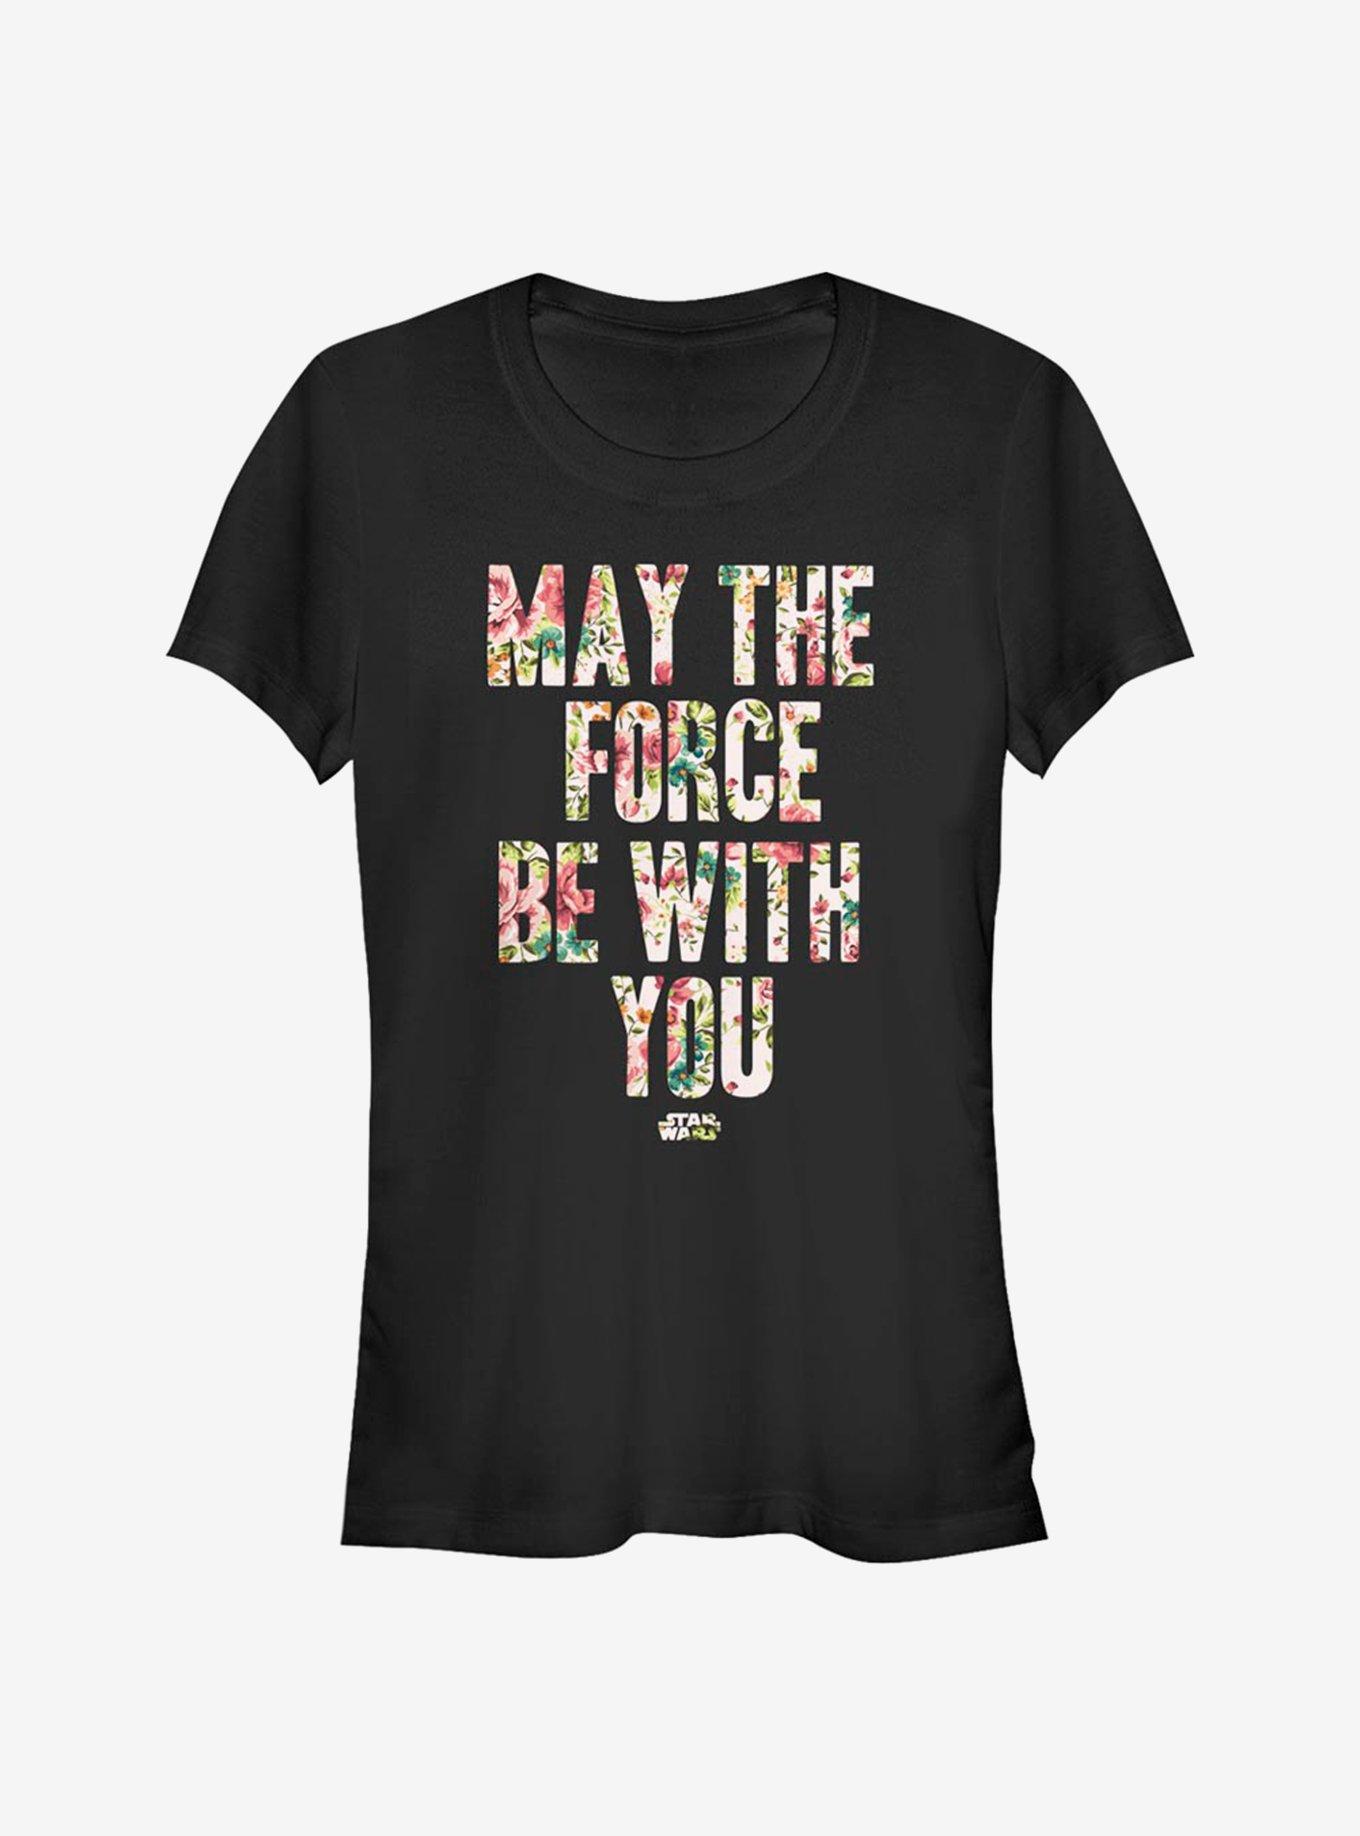 Star Wars Force Be With You Floral Girls T-Shirt, BLACK, hi-res